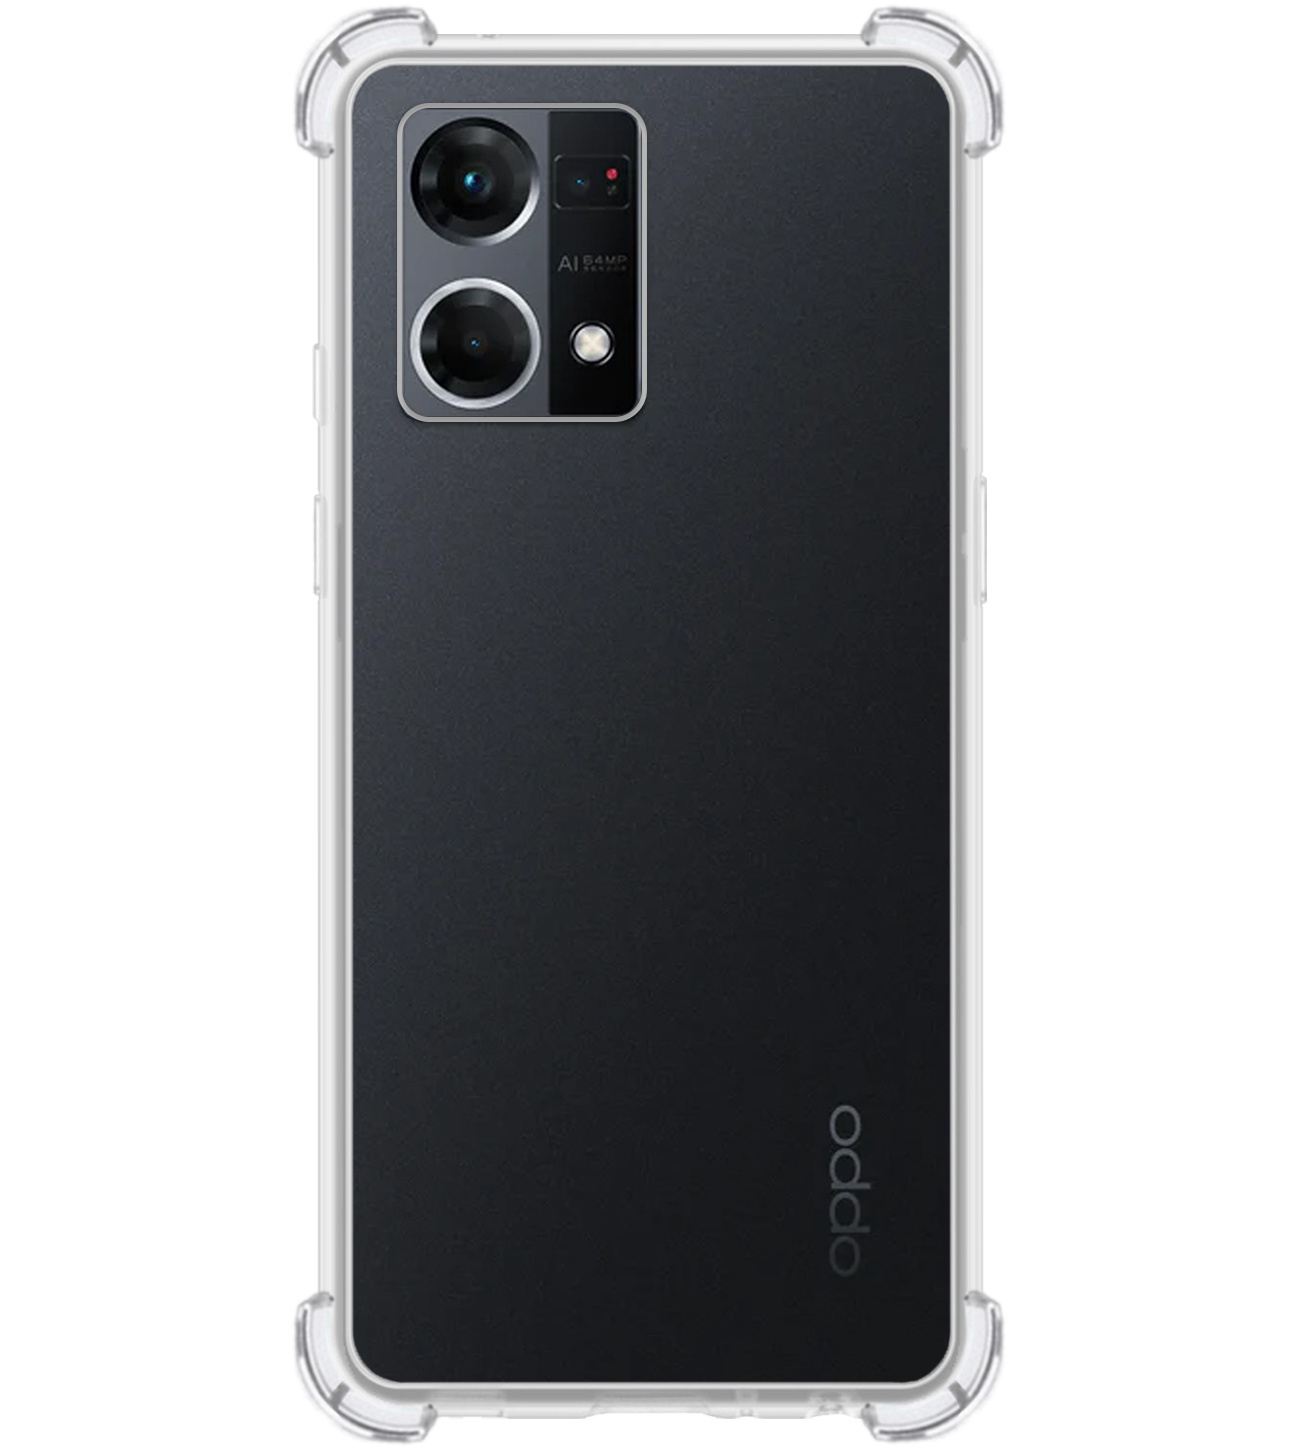 BASEY. Oppo Reno7 Hoesje Shock Proof Case Hoes Met 2x Screenprotector - Oppo Reno7 Hoes Cover Shockproof Transparant